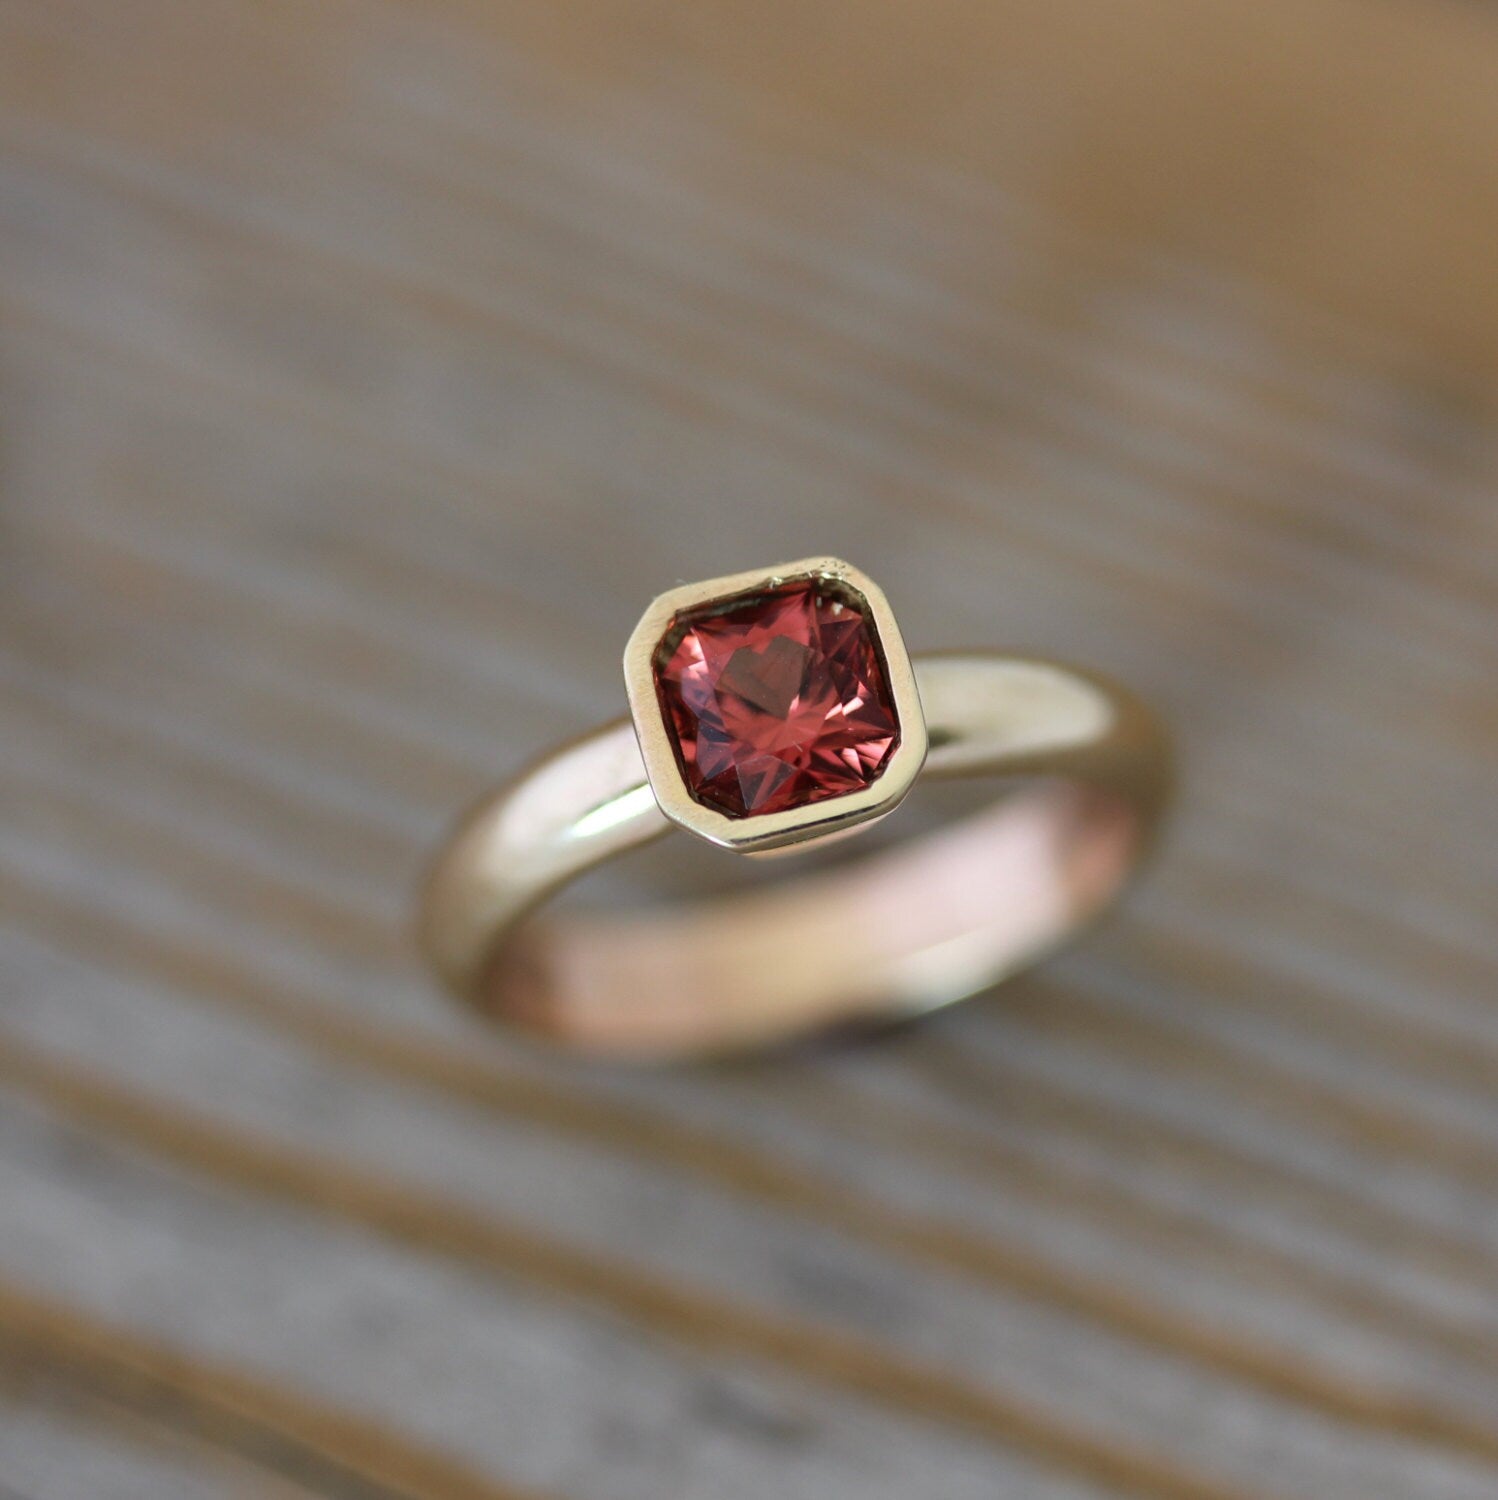 A handmade Asscher Cut Pink Spinel Ring in 14k Yellow Gold with a red garnet stone, crafted by Cassin Jewelry.